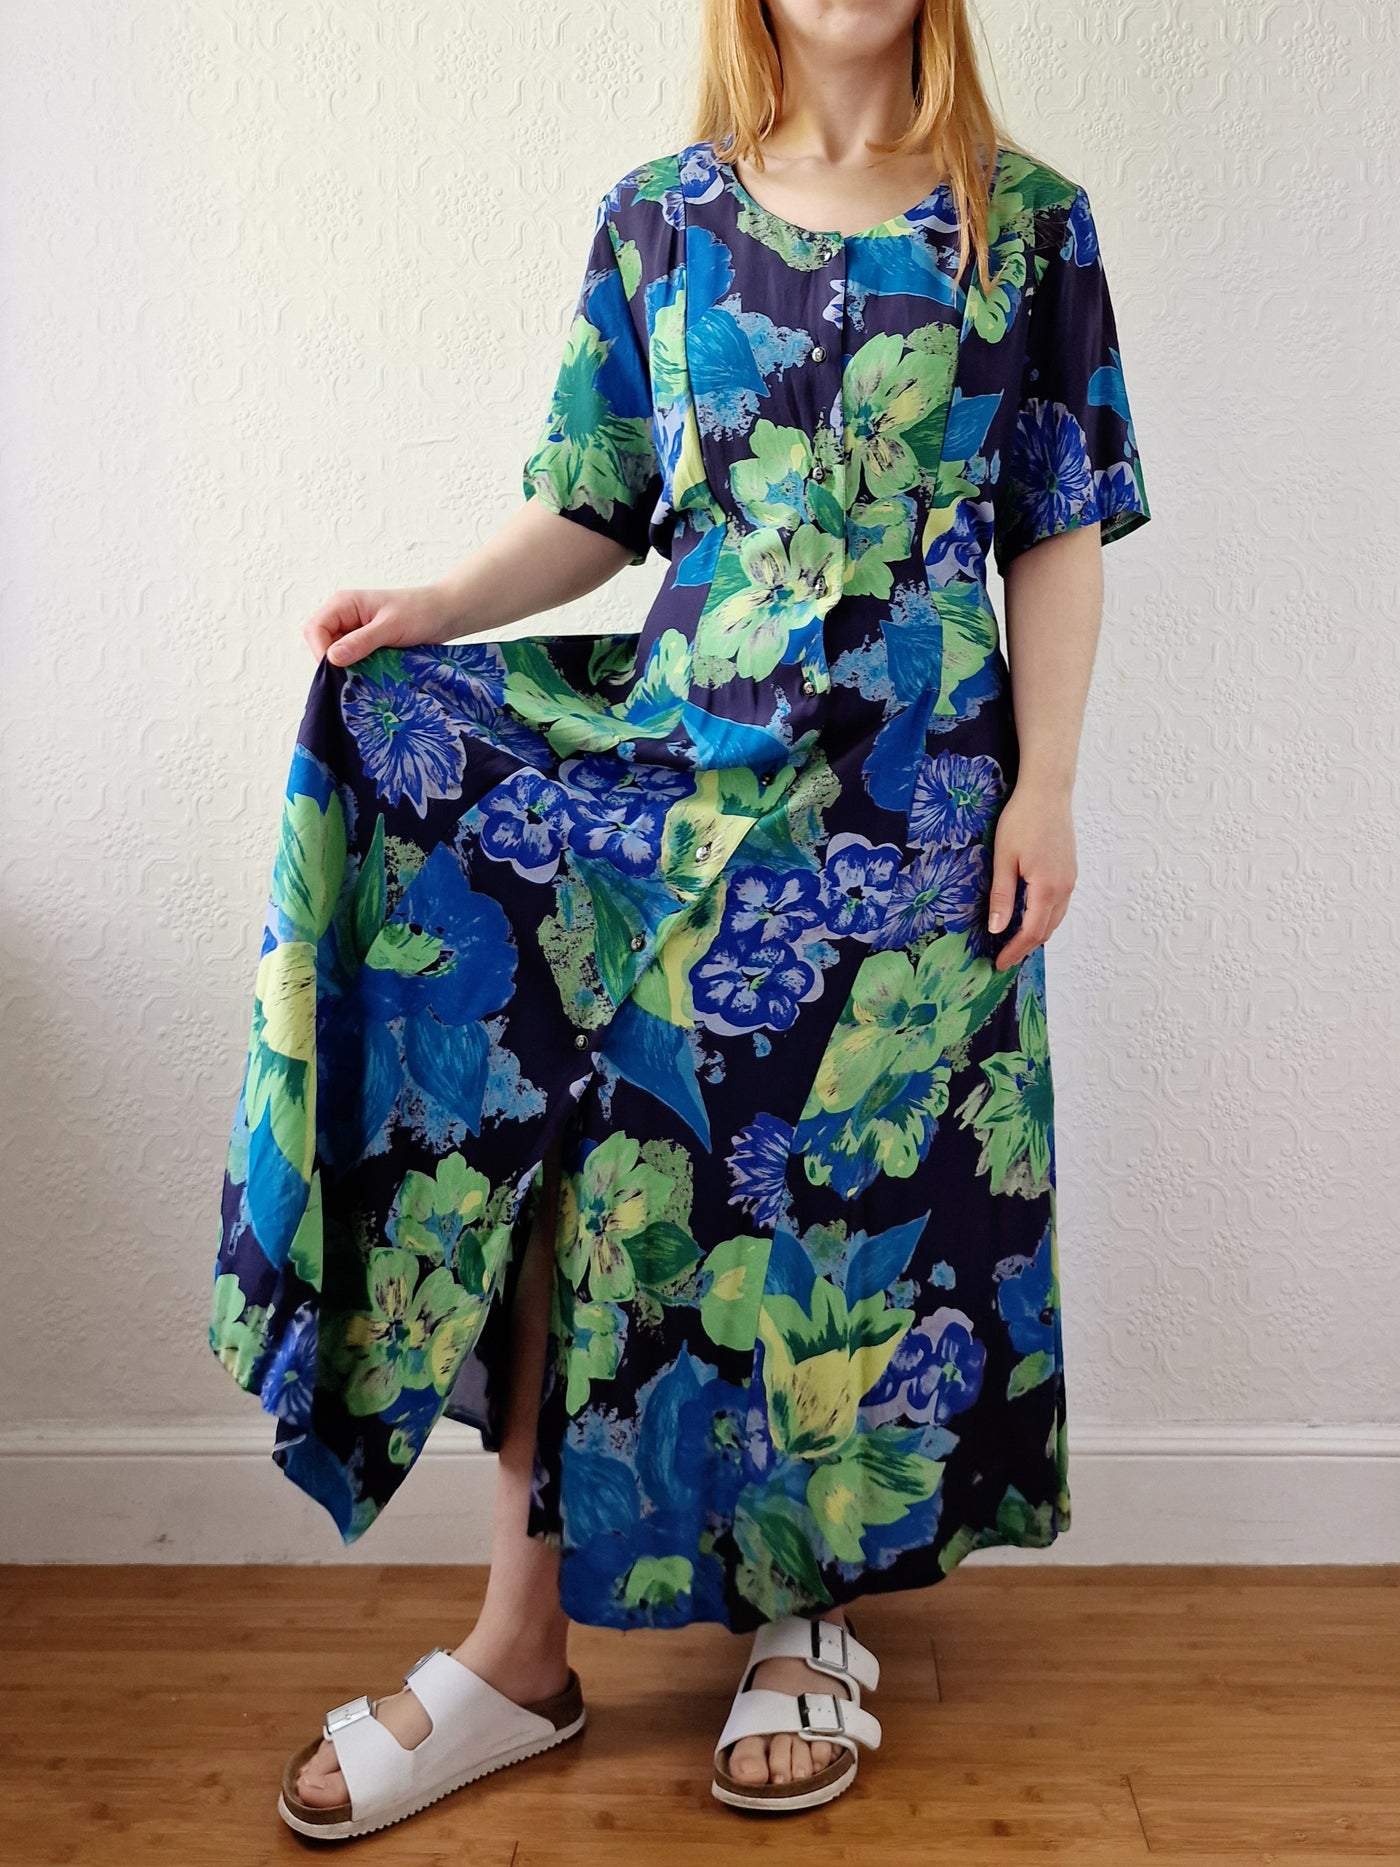 Vintage 90s Green & Blue Floral Dress with Short Sleeves - XL